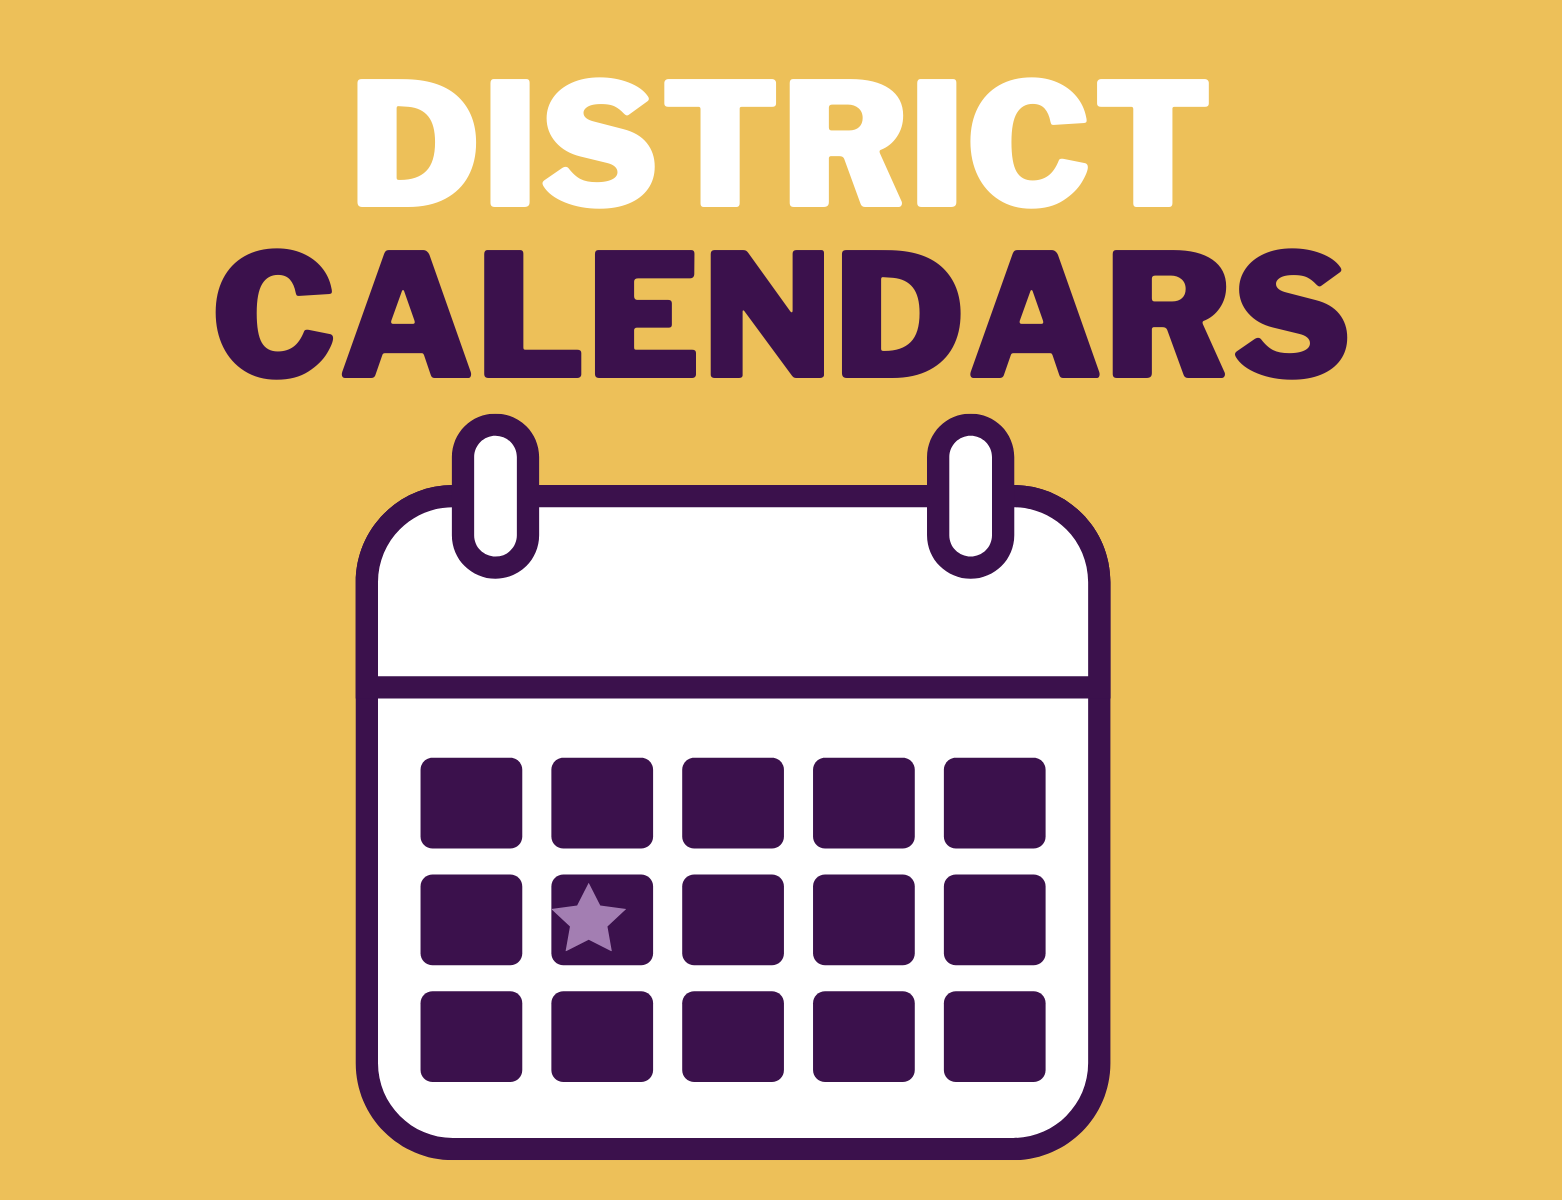 Link to District Calendars